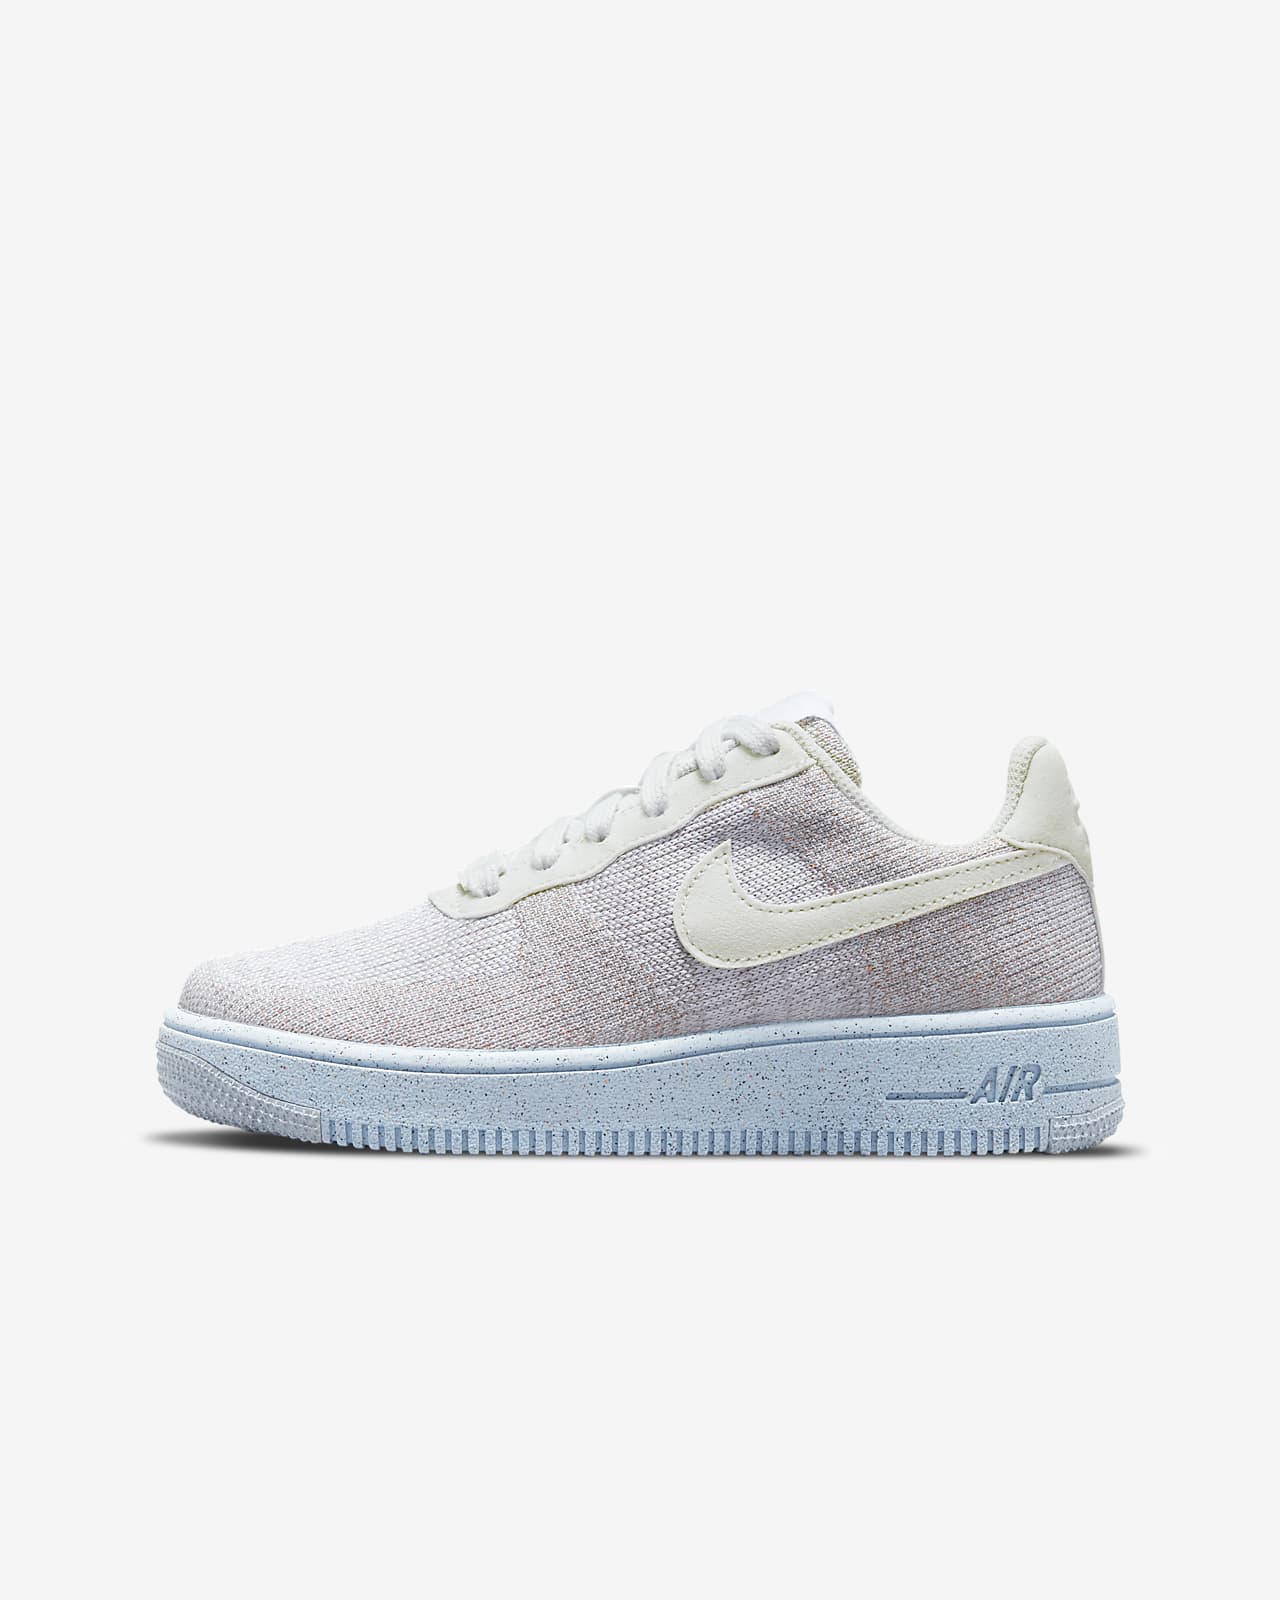 Nike Air Force 1 Crater Flyknit Older Kids' Shoe